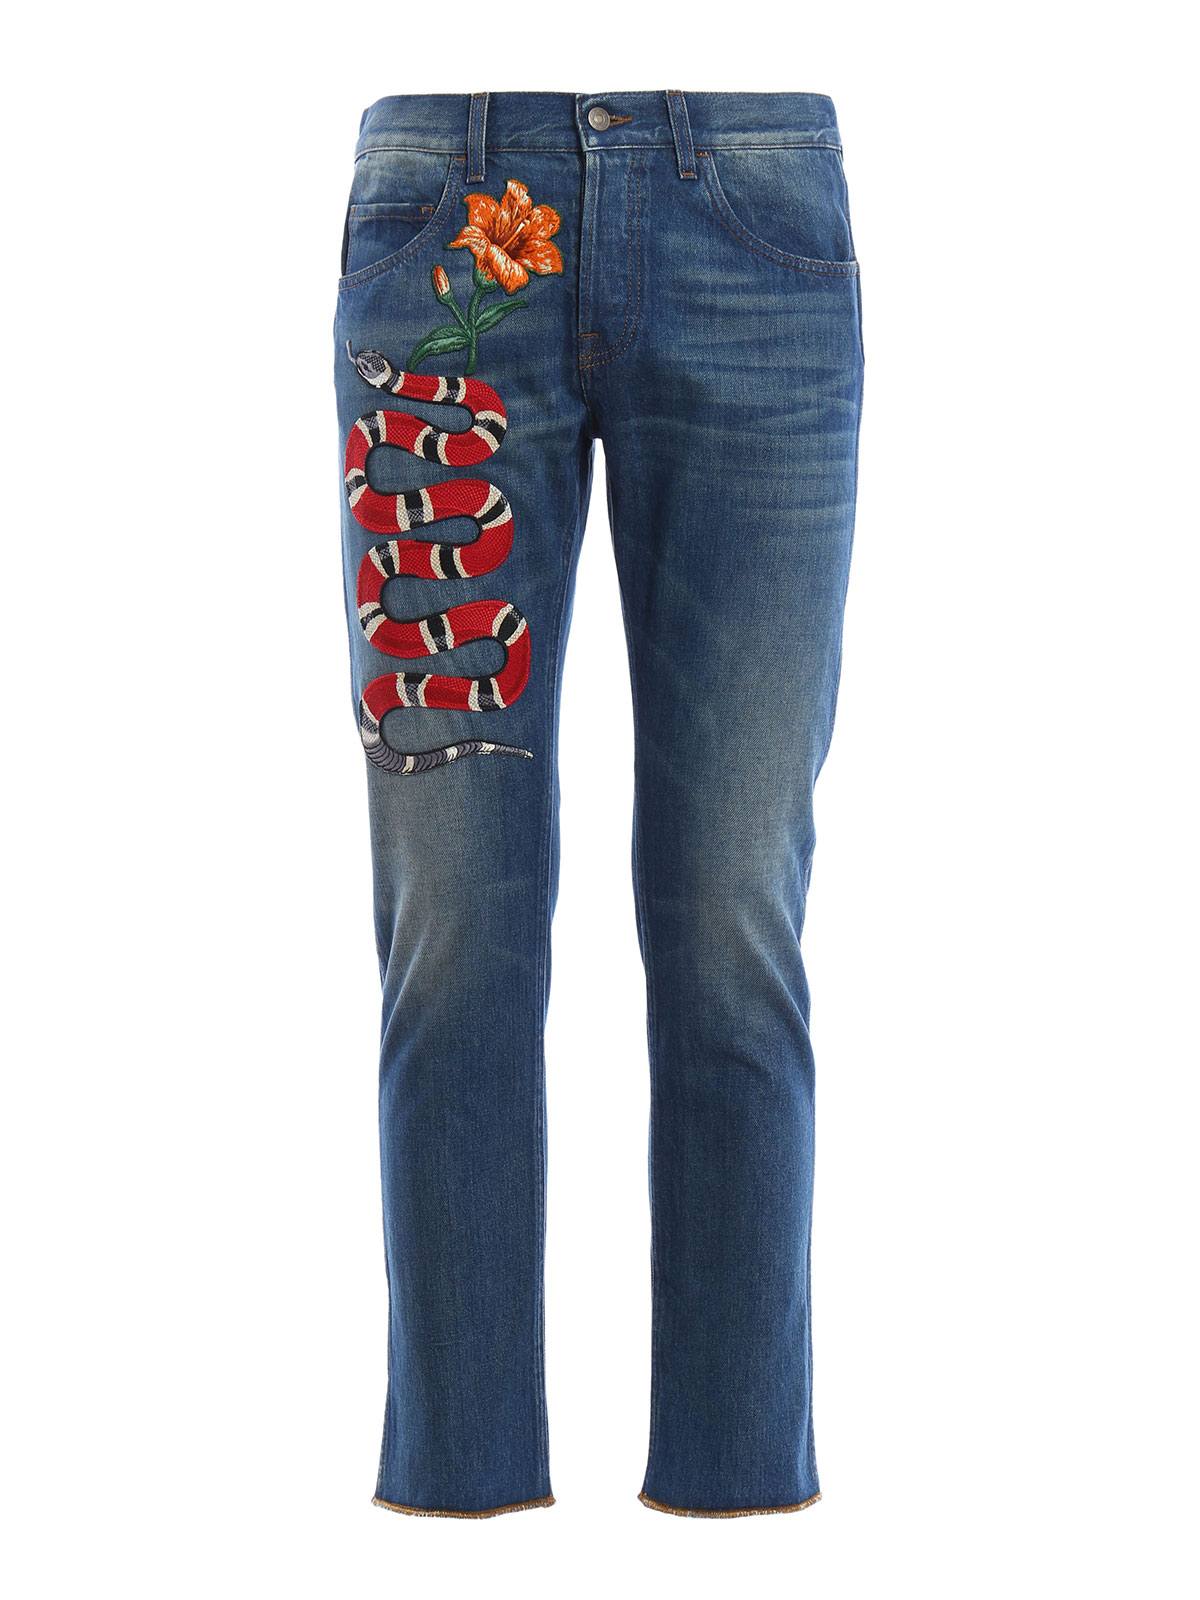 Gucci - Slim fit embroidered jeans - straight leg jeans - 430356XR190 4571